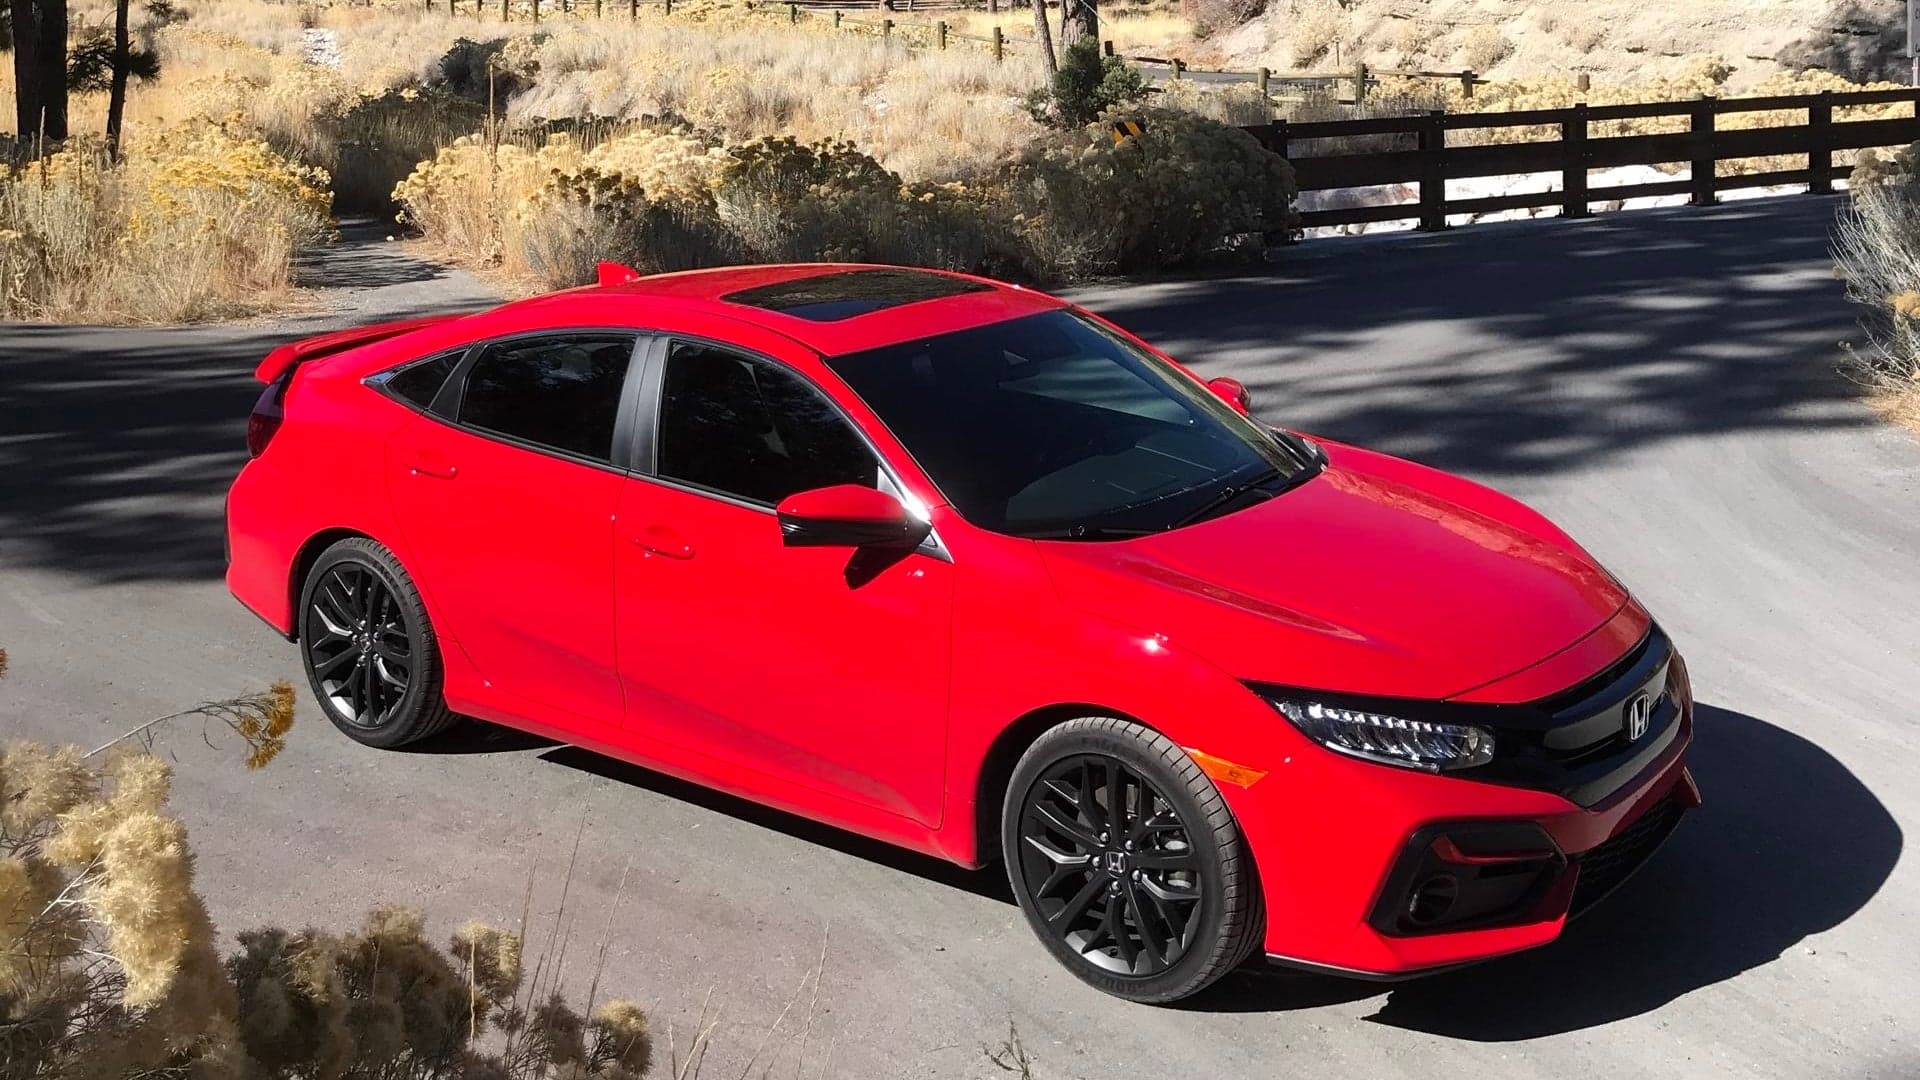 2020 Honda Civic Si Review: The Best $26,000 Car You Can Buy